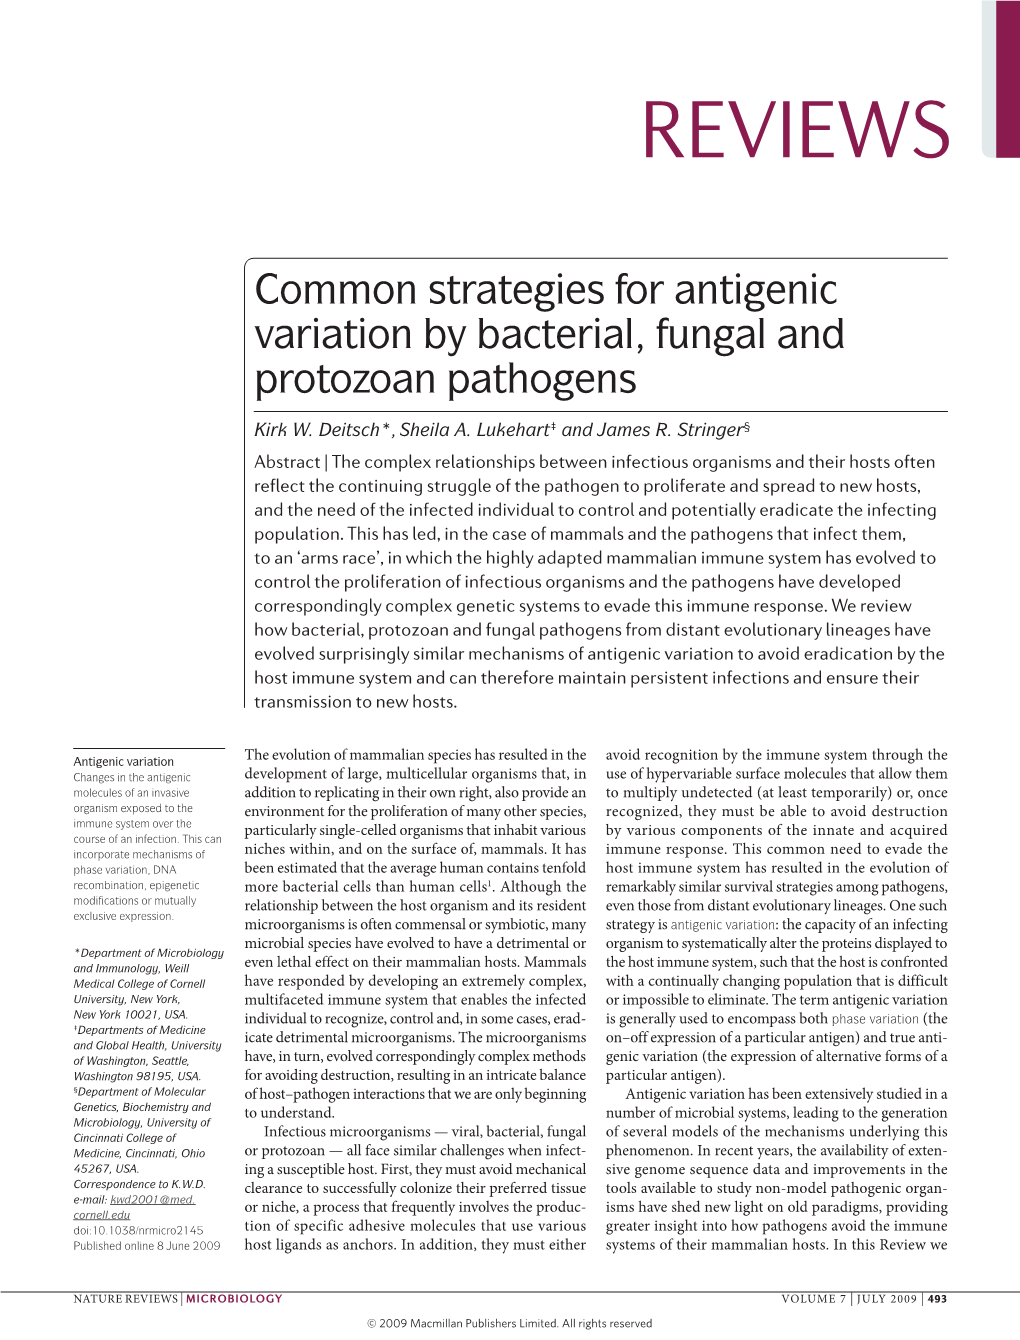 Common Strategies for Antigenic Variation by Bacterial, Fungal and Protozoan Pathogens